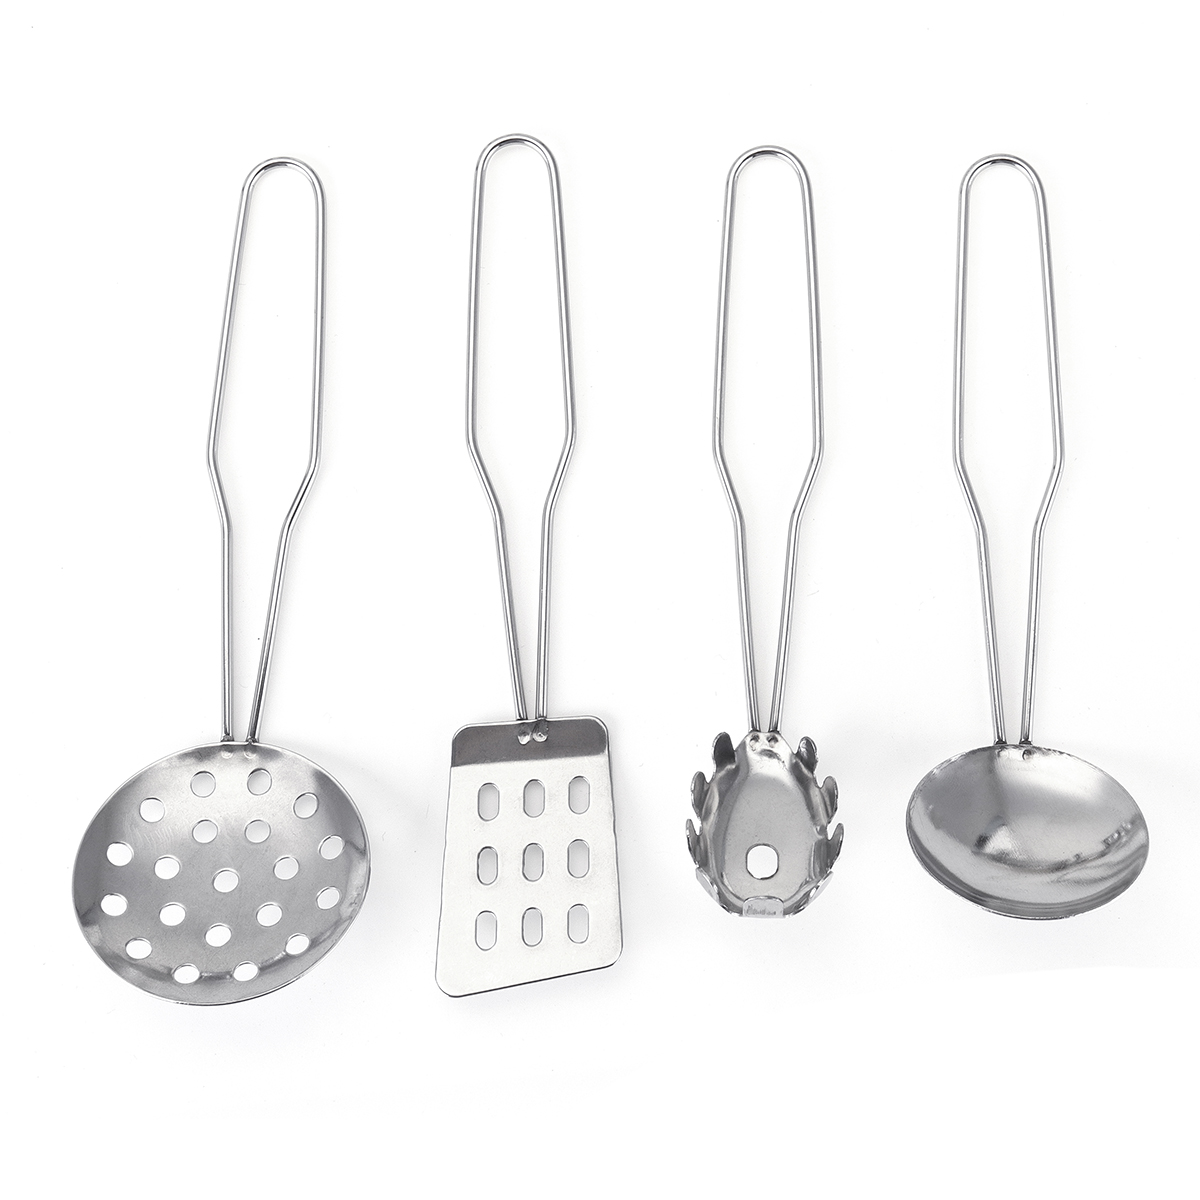 32PCS-Mini-Stainless-Steel-Kitchen-Cutlery-Play-House-Food-Toy-Boiler-Kettle-Cup-Bowl-Spoon-Cookware-1423237-10